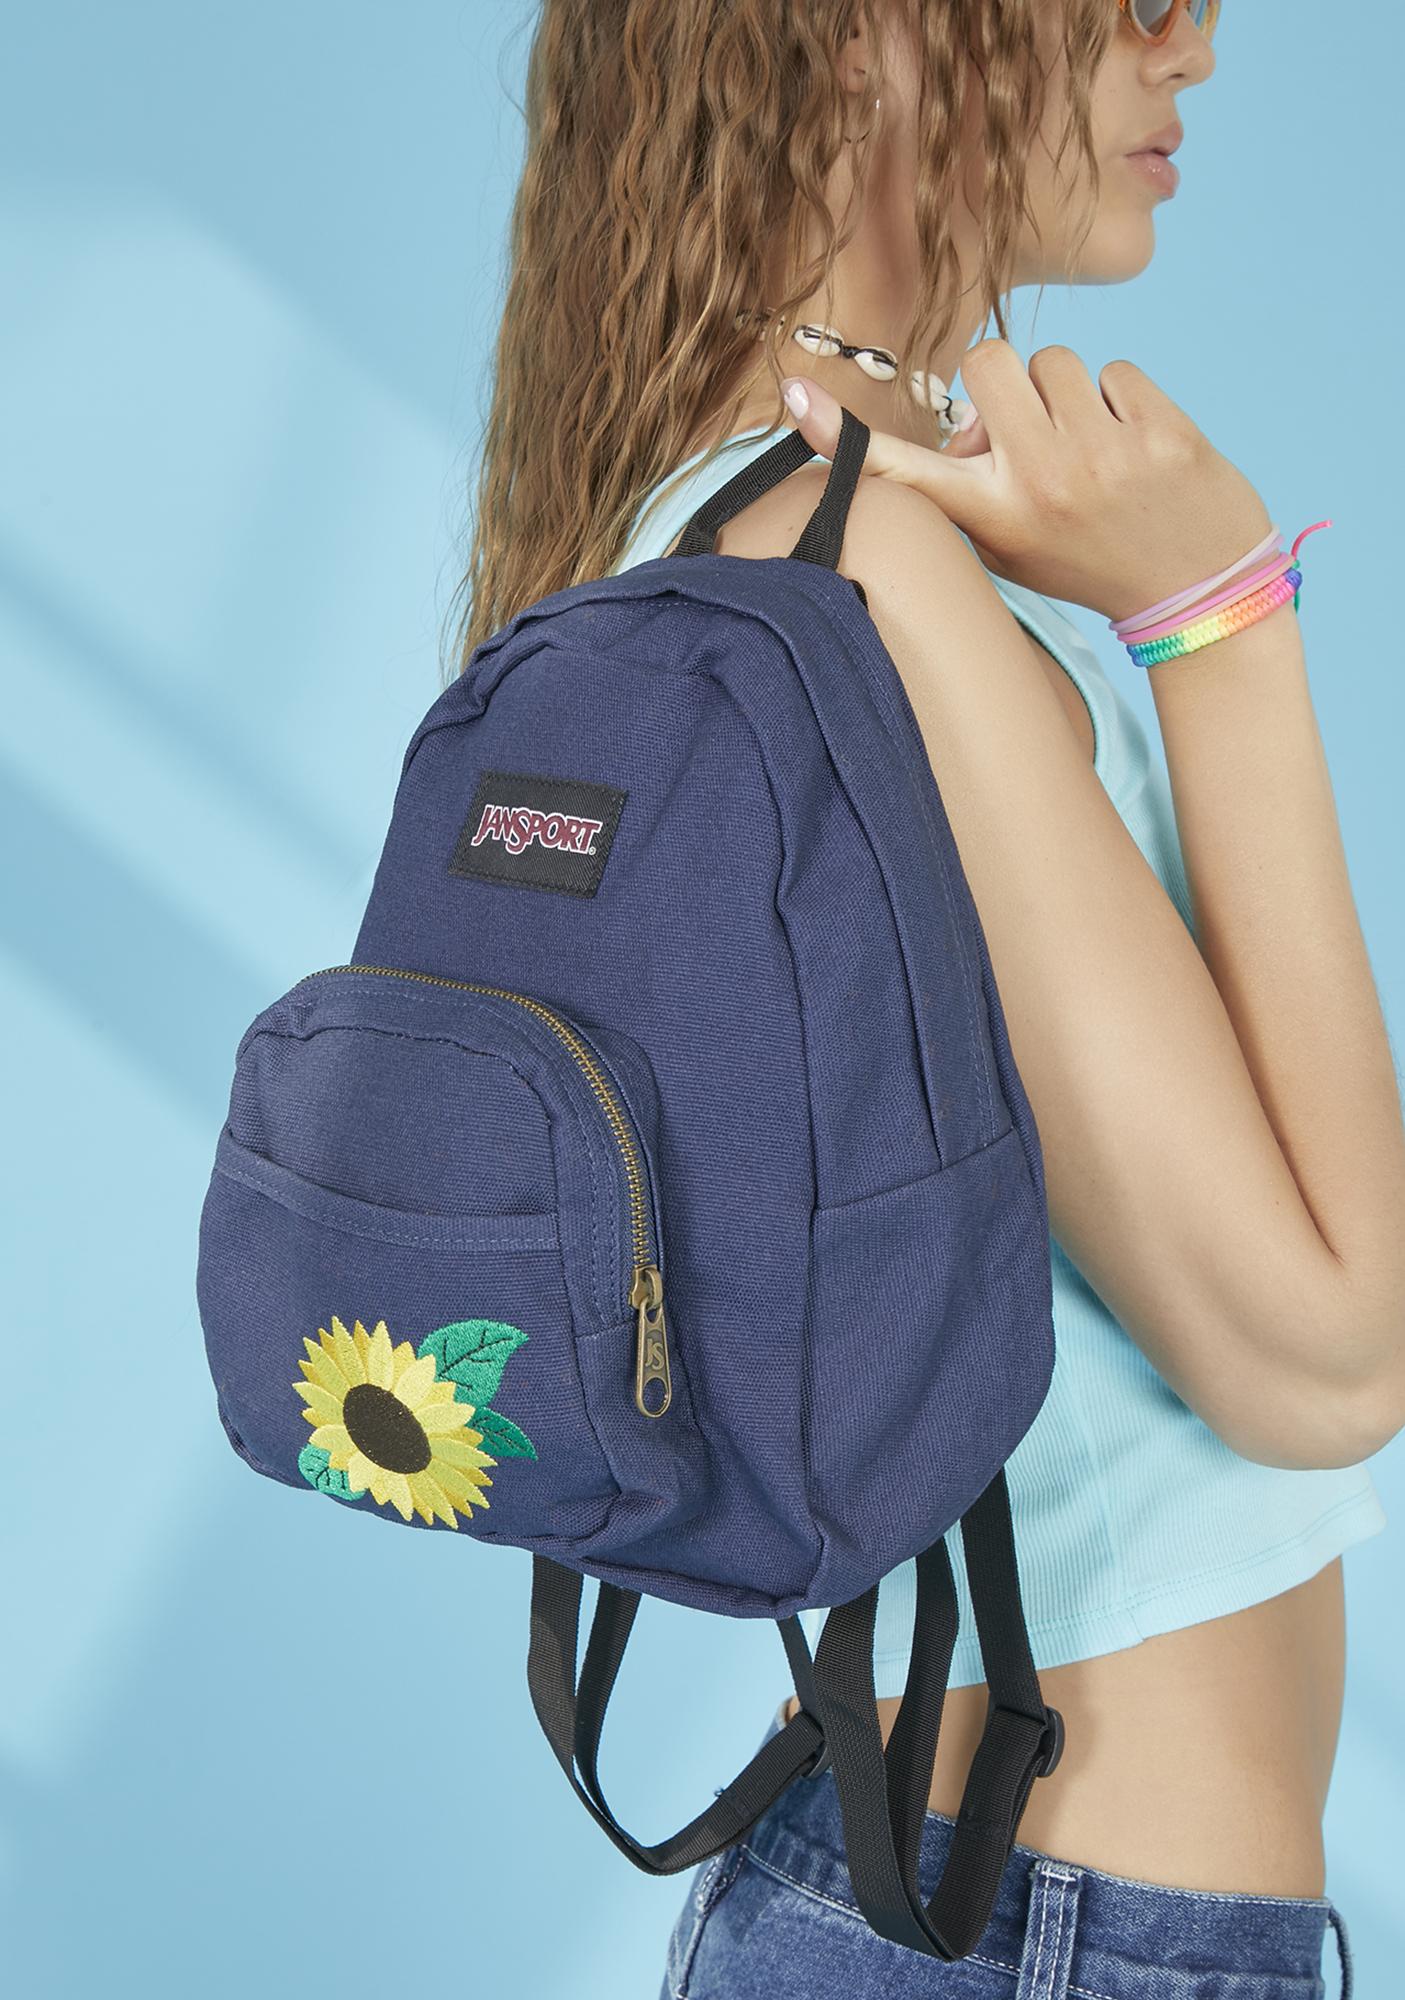 jansport small backpack price